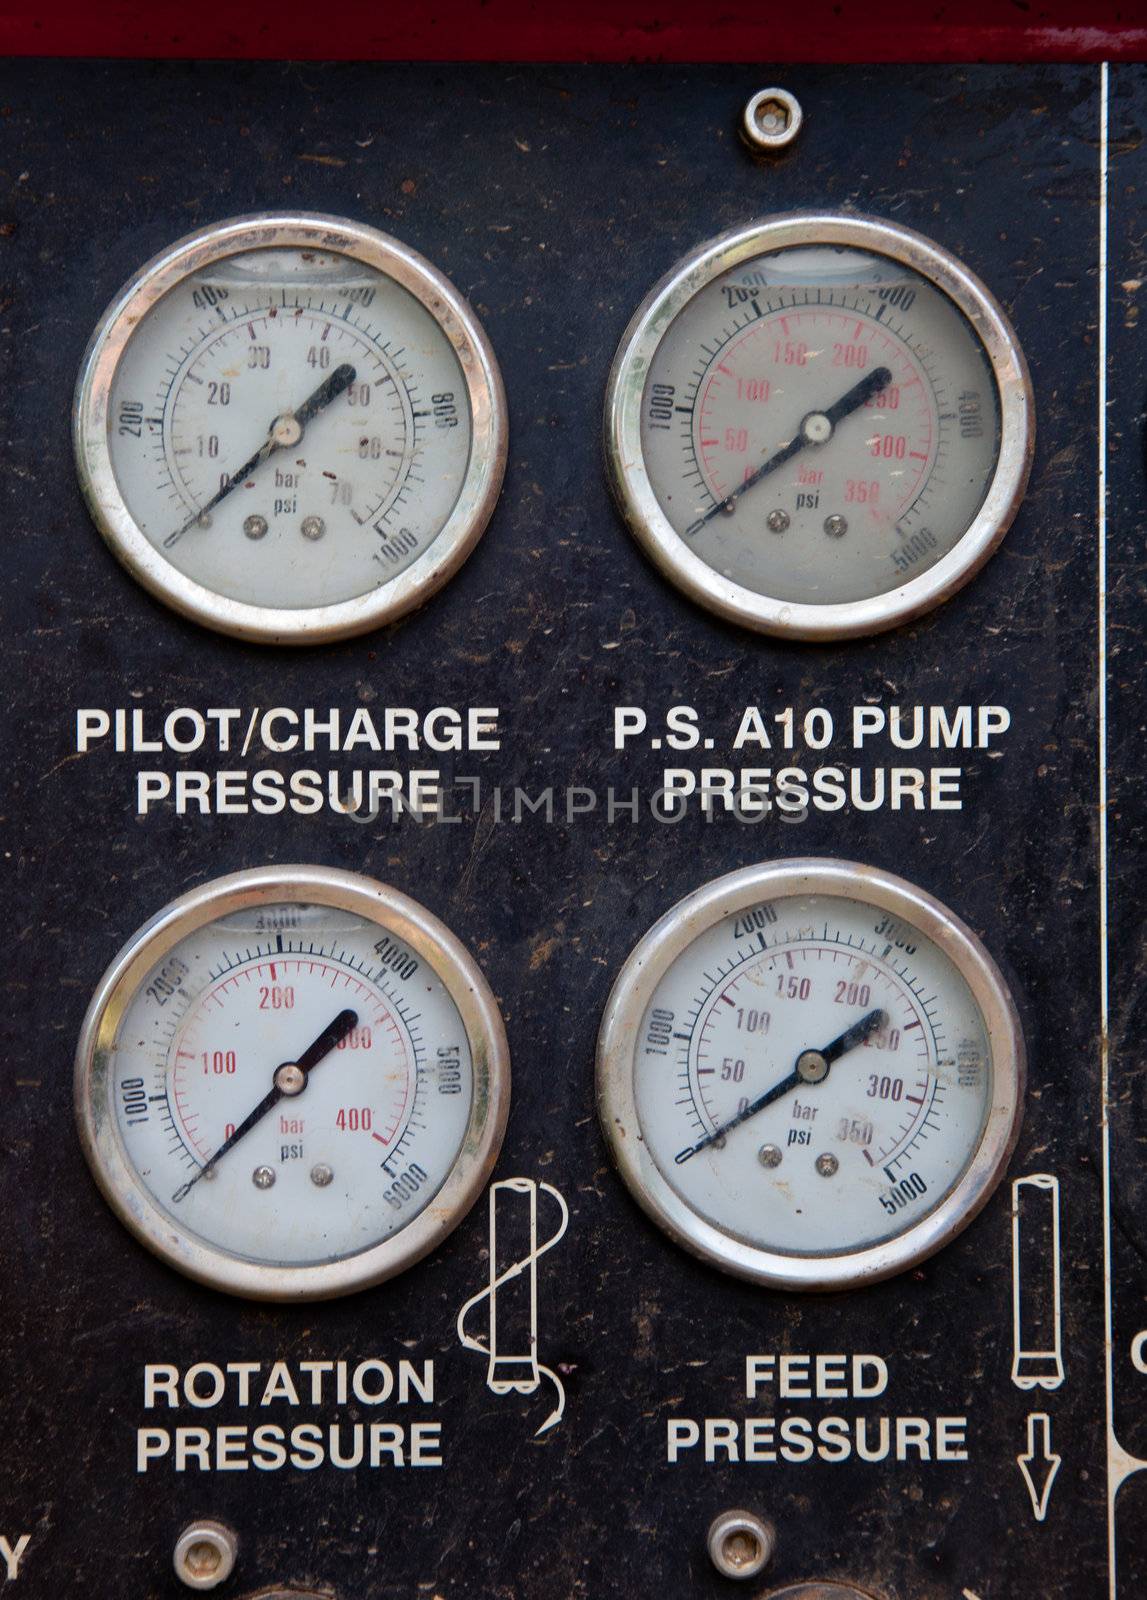 Pressure gauges on drill by steheap